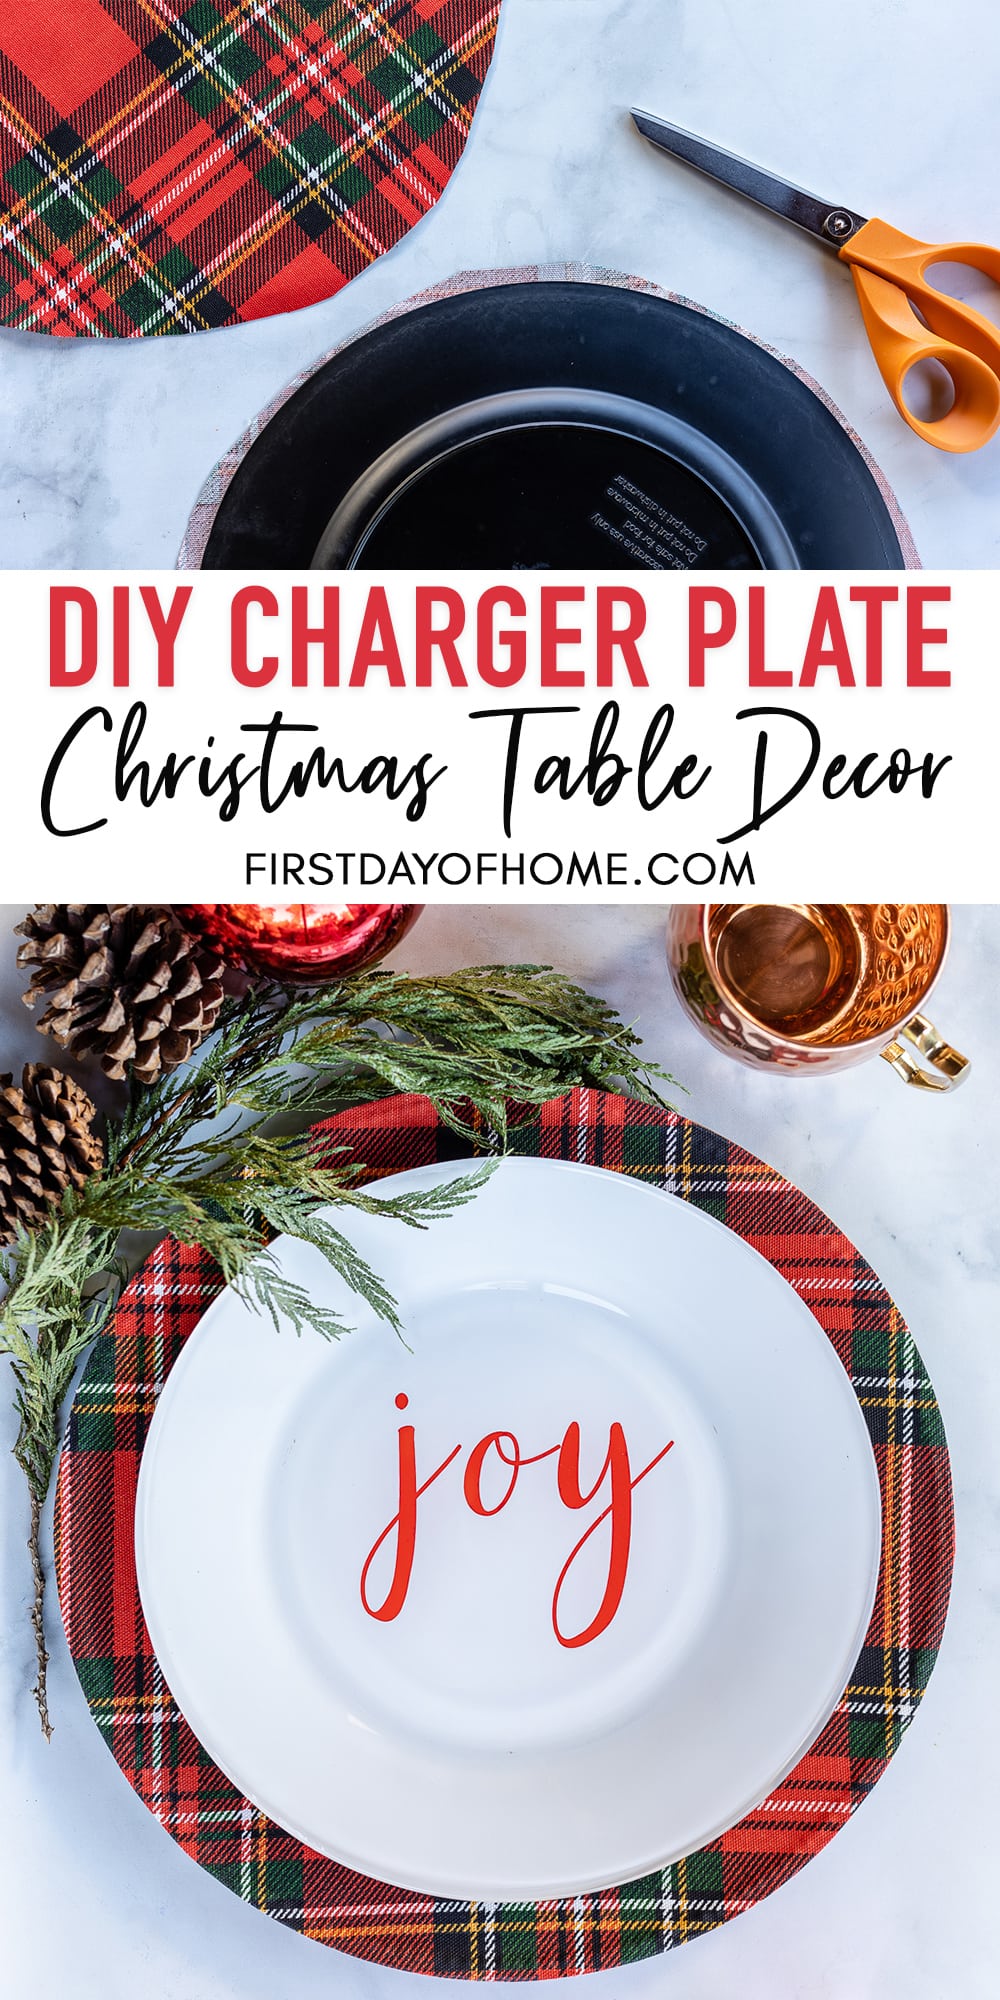 Pin reading "DIY Charger Plate, Christmas Table Decor" with images of a tartan plaid charger plate with a white Joy plate on top.